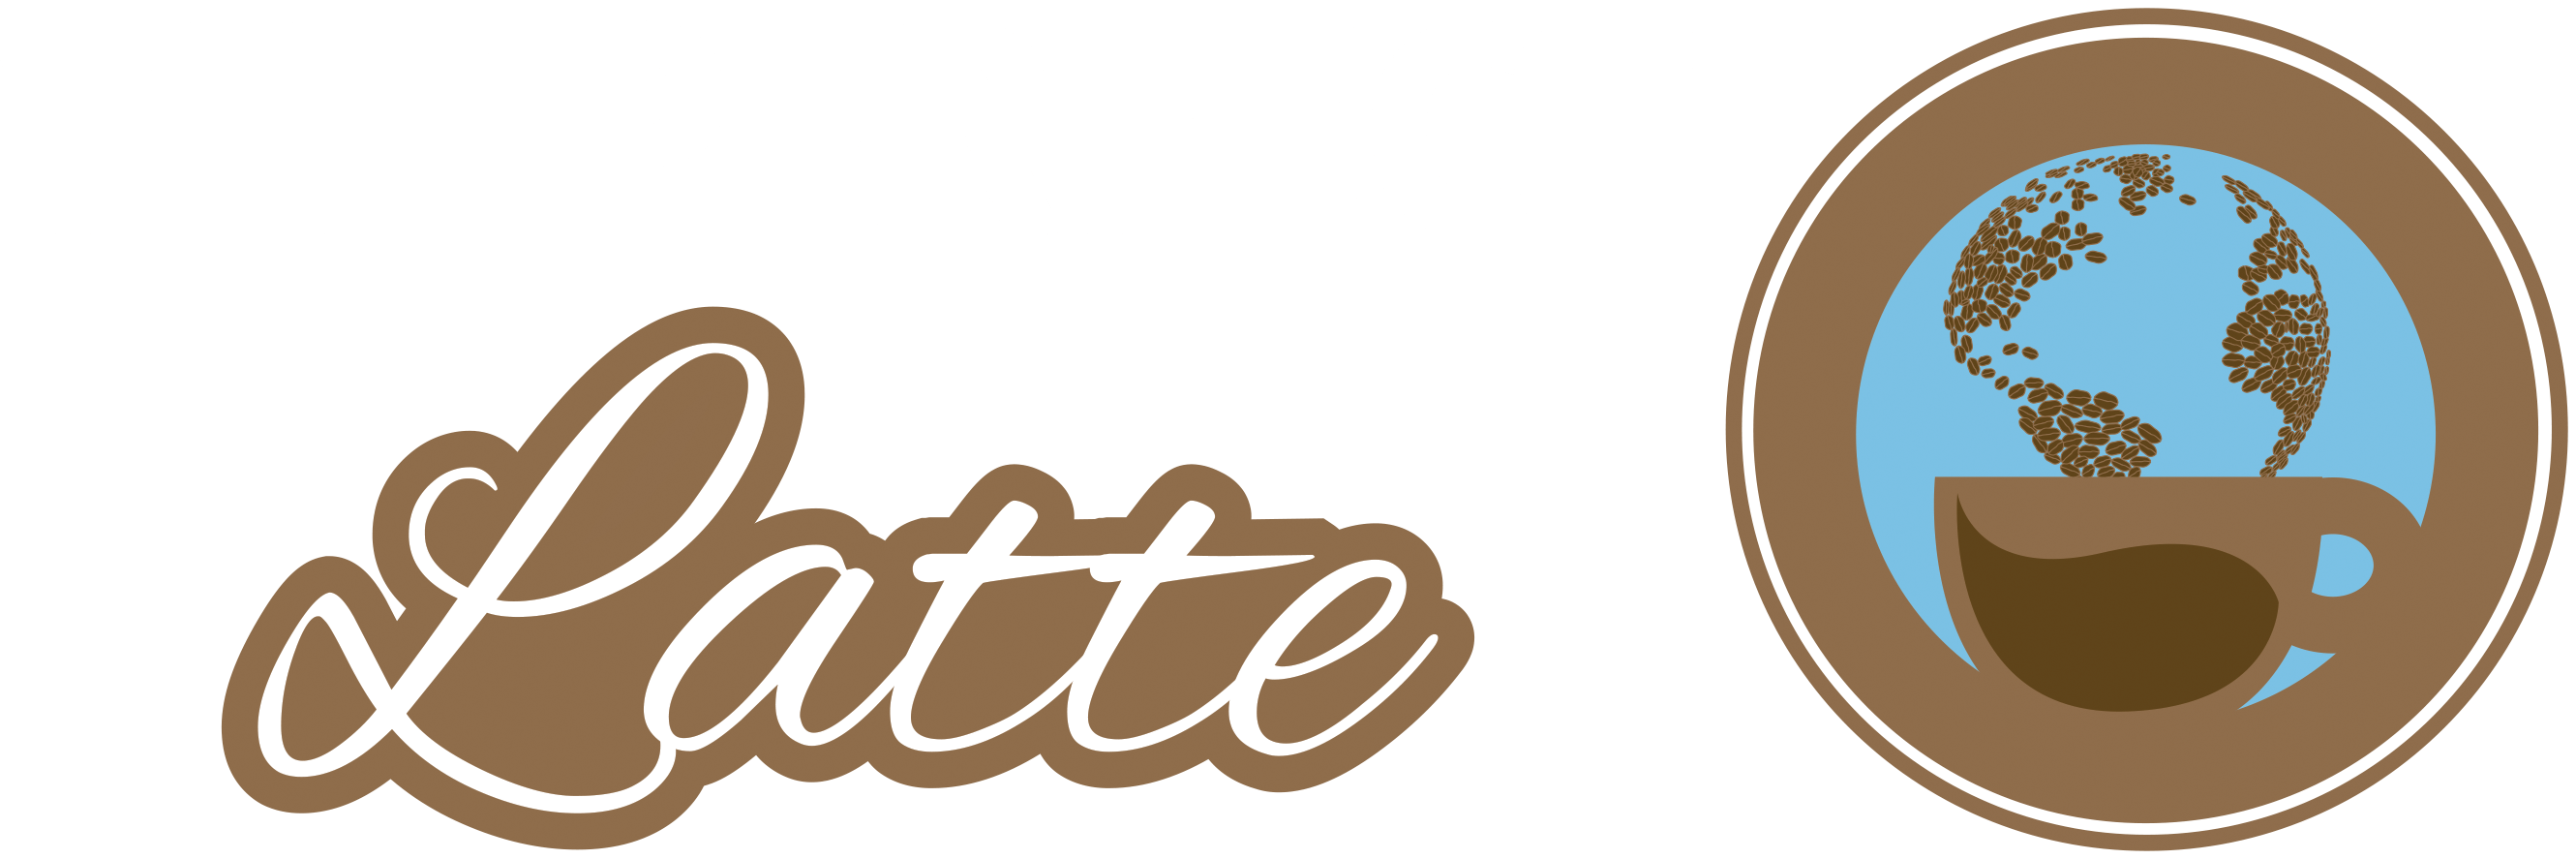 Latte Logo - The Perfect Latte your taste buds